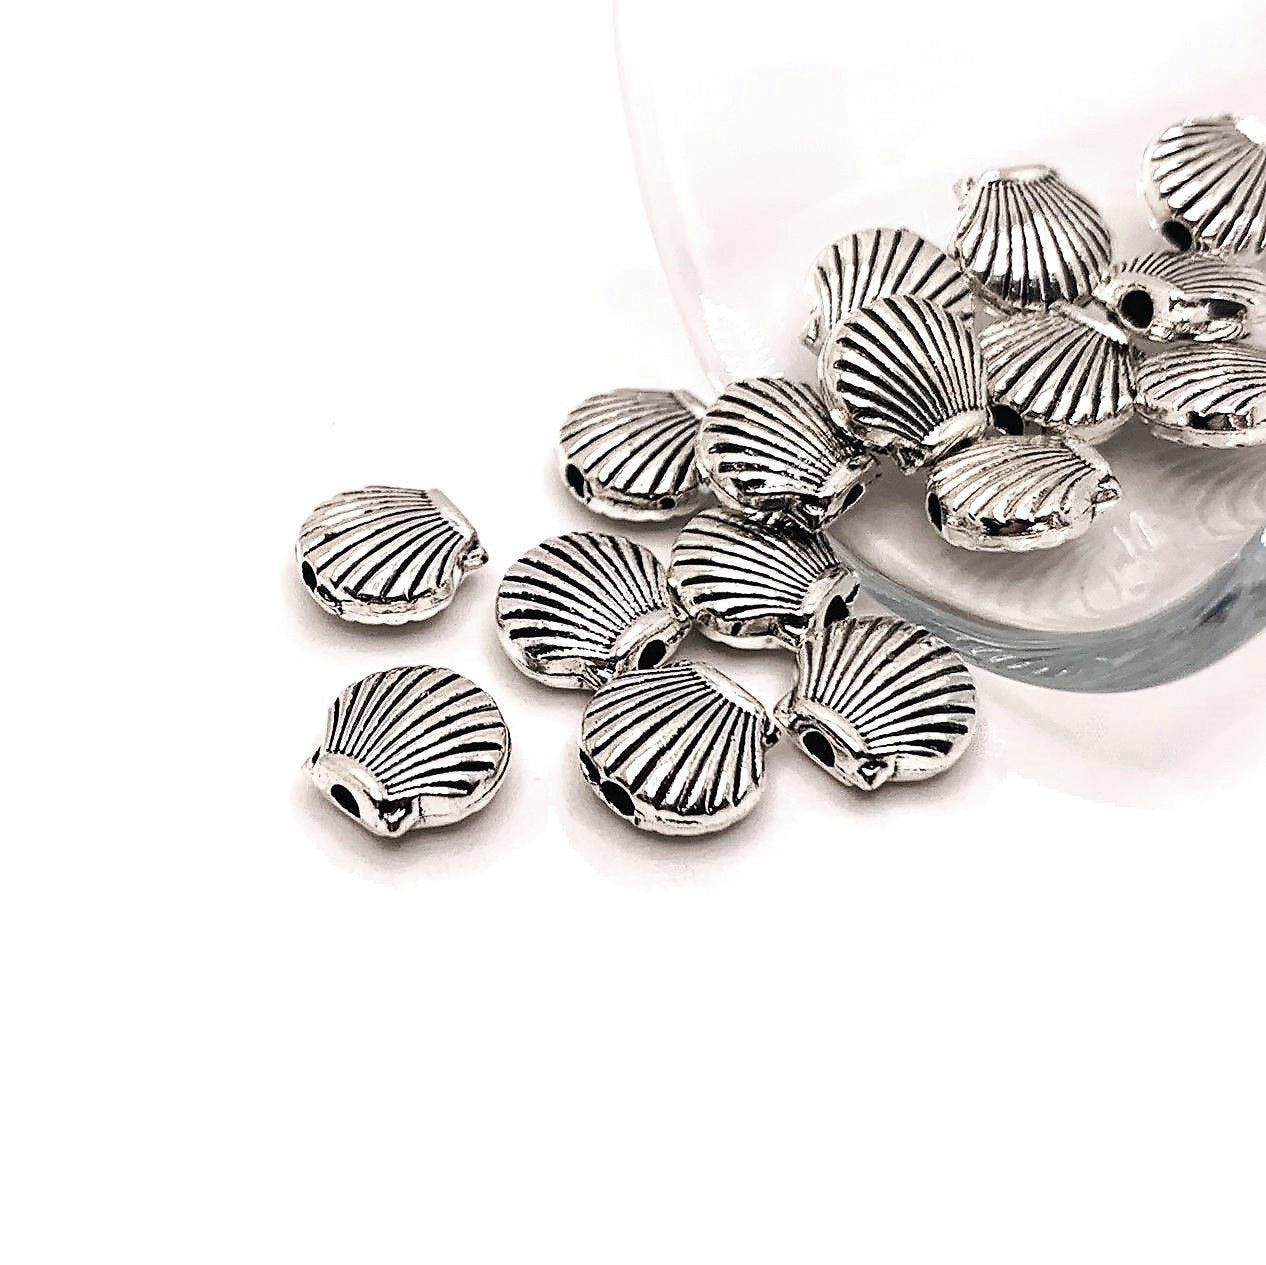 4, 20 or 50 Pieces: Silver Clam Shell Spacer 3D Charm Beads